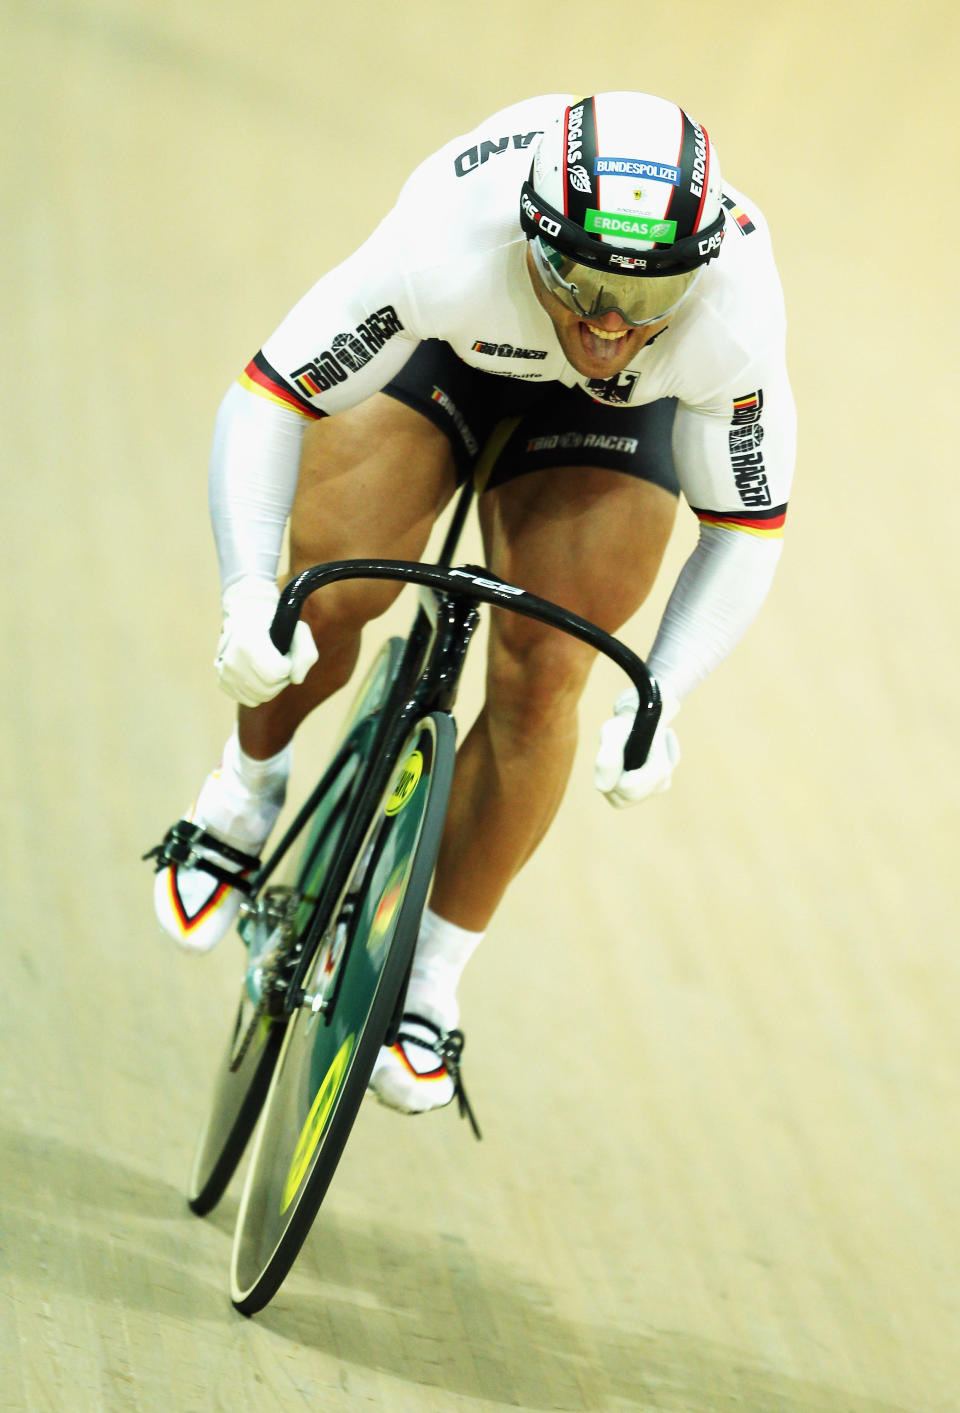 Robert Forstemann of Germany rides in the Men's Sprint on day two of the European Elite Track Cycling Championships at the BGZ Arena on November 6, 2010 in Pruszkow, Poland. (Getty Images)